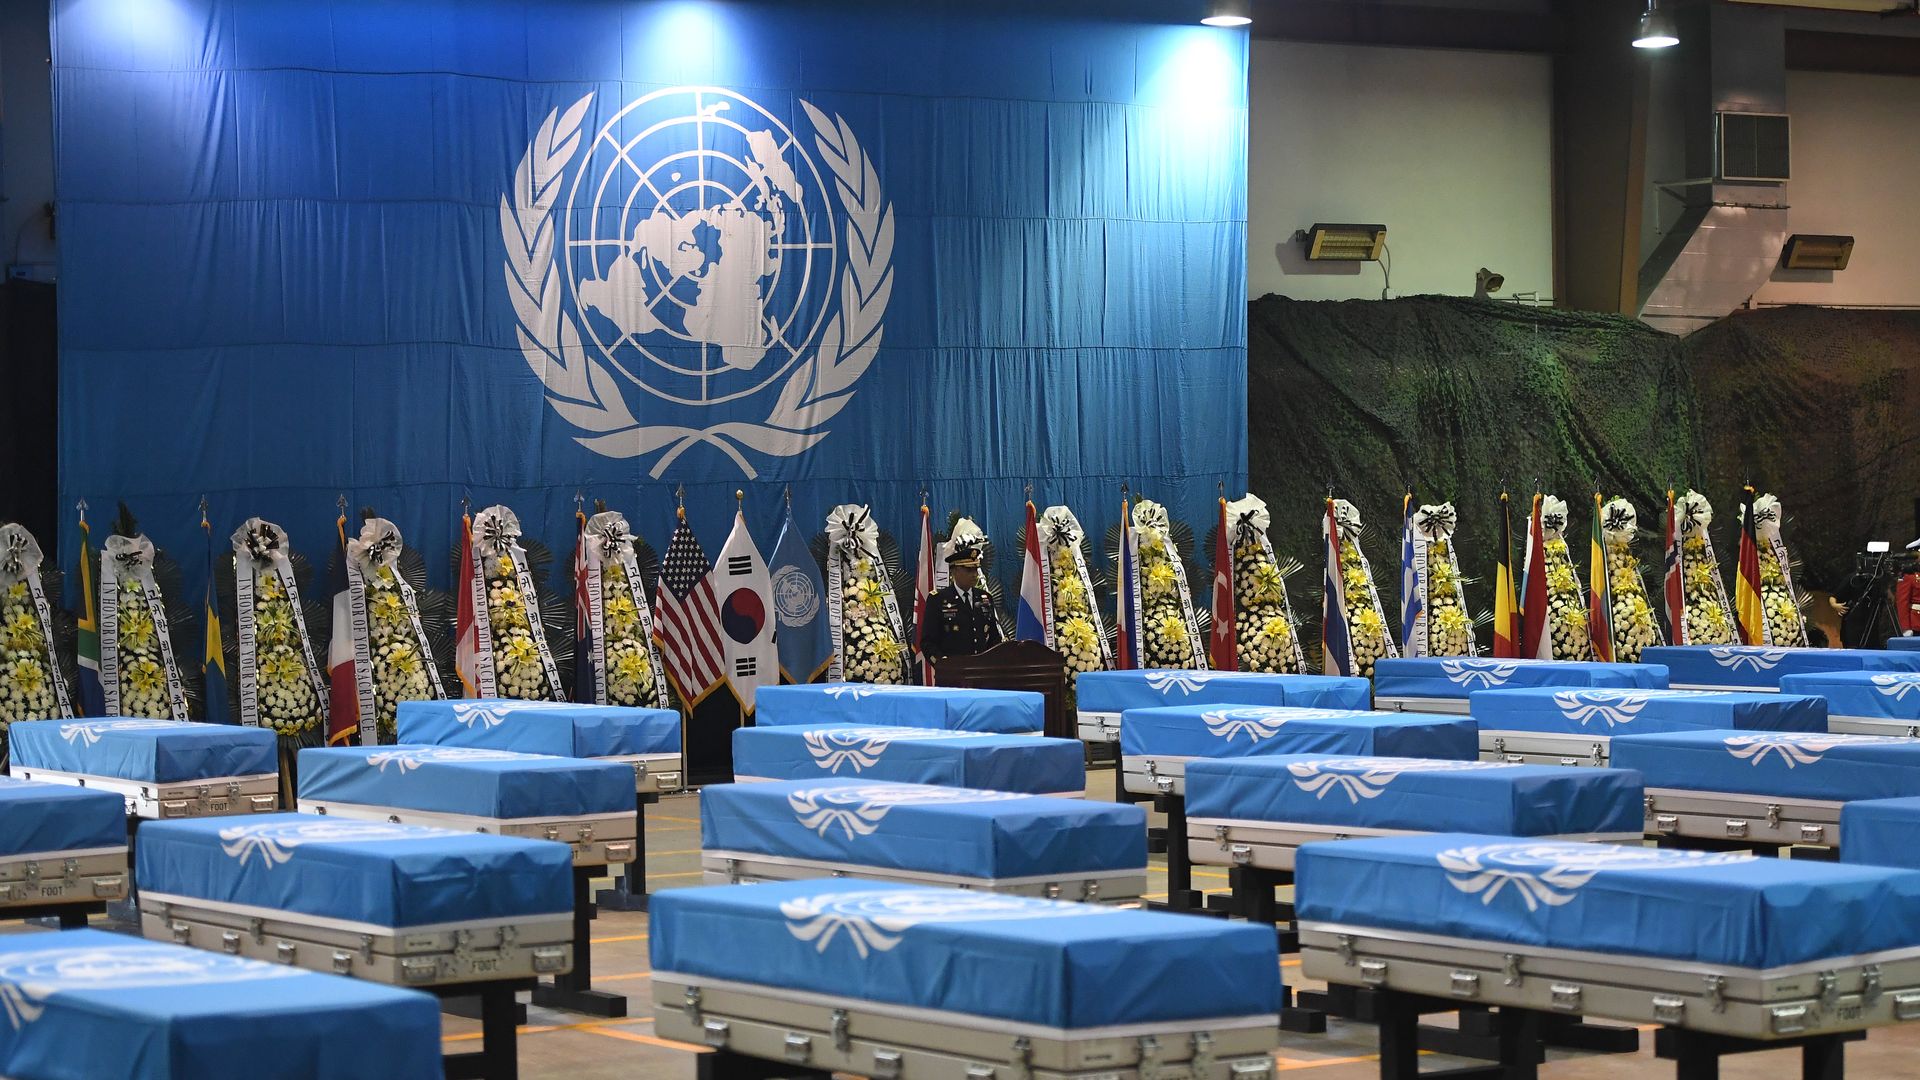 Caskets covered in blue sheets at a UN repatriation ceremony